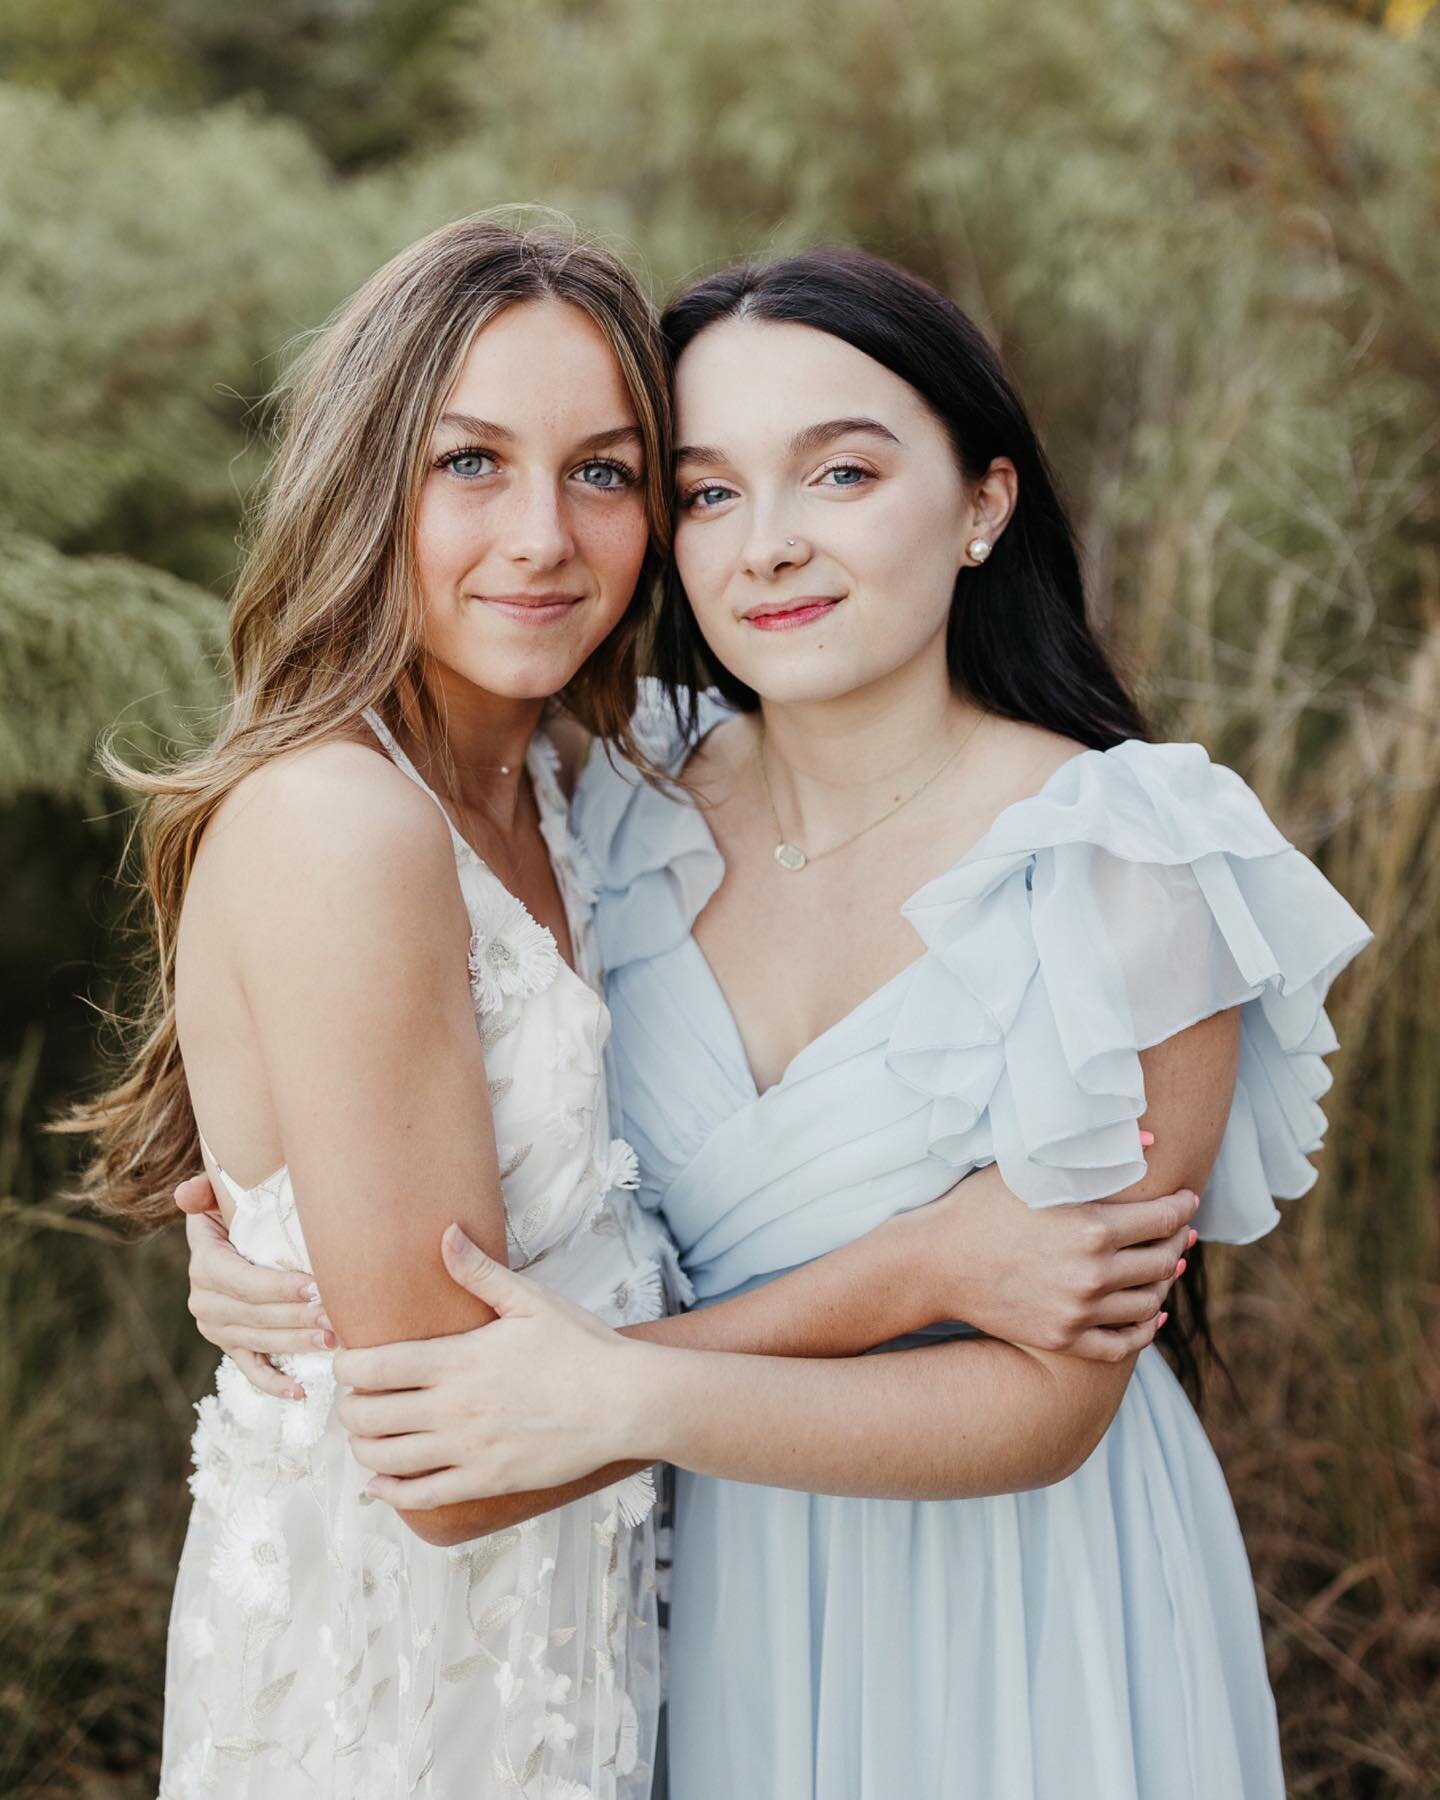 &ldquo;We&rsquo;ve never been in front of a camera before&rdquo; OKAYY WELL YOU KILLED IT!!! The last time I saw these two, they were little kids (their mom was one of my CrossFit coaches)&hellip; and they&rsquo;ve grown up to be such beautiful young